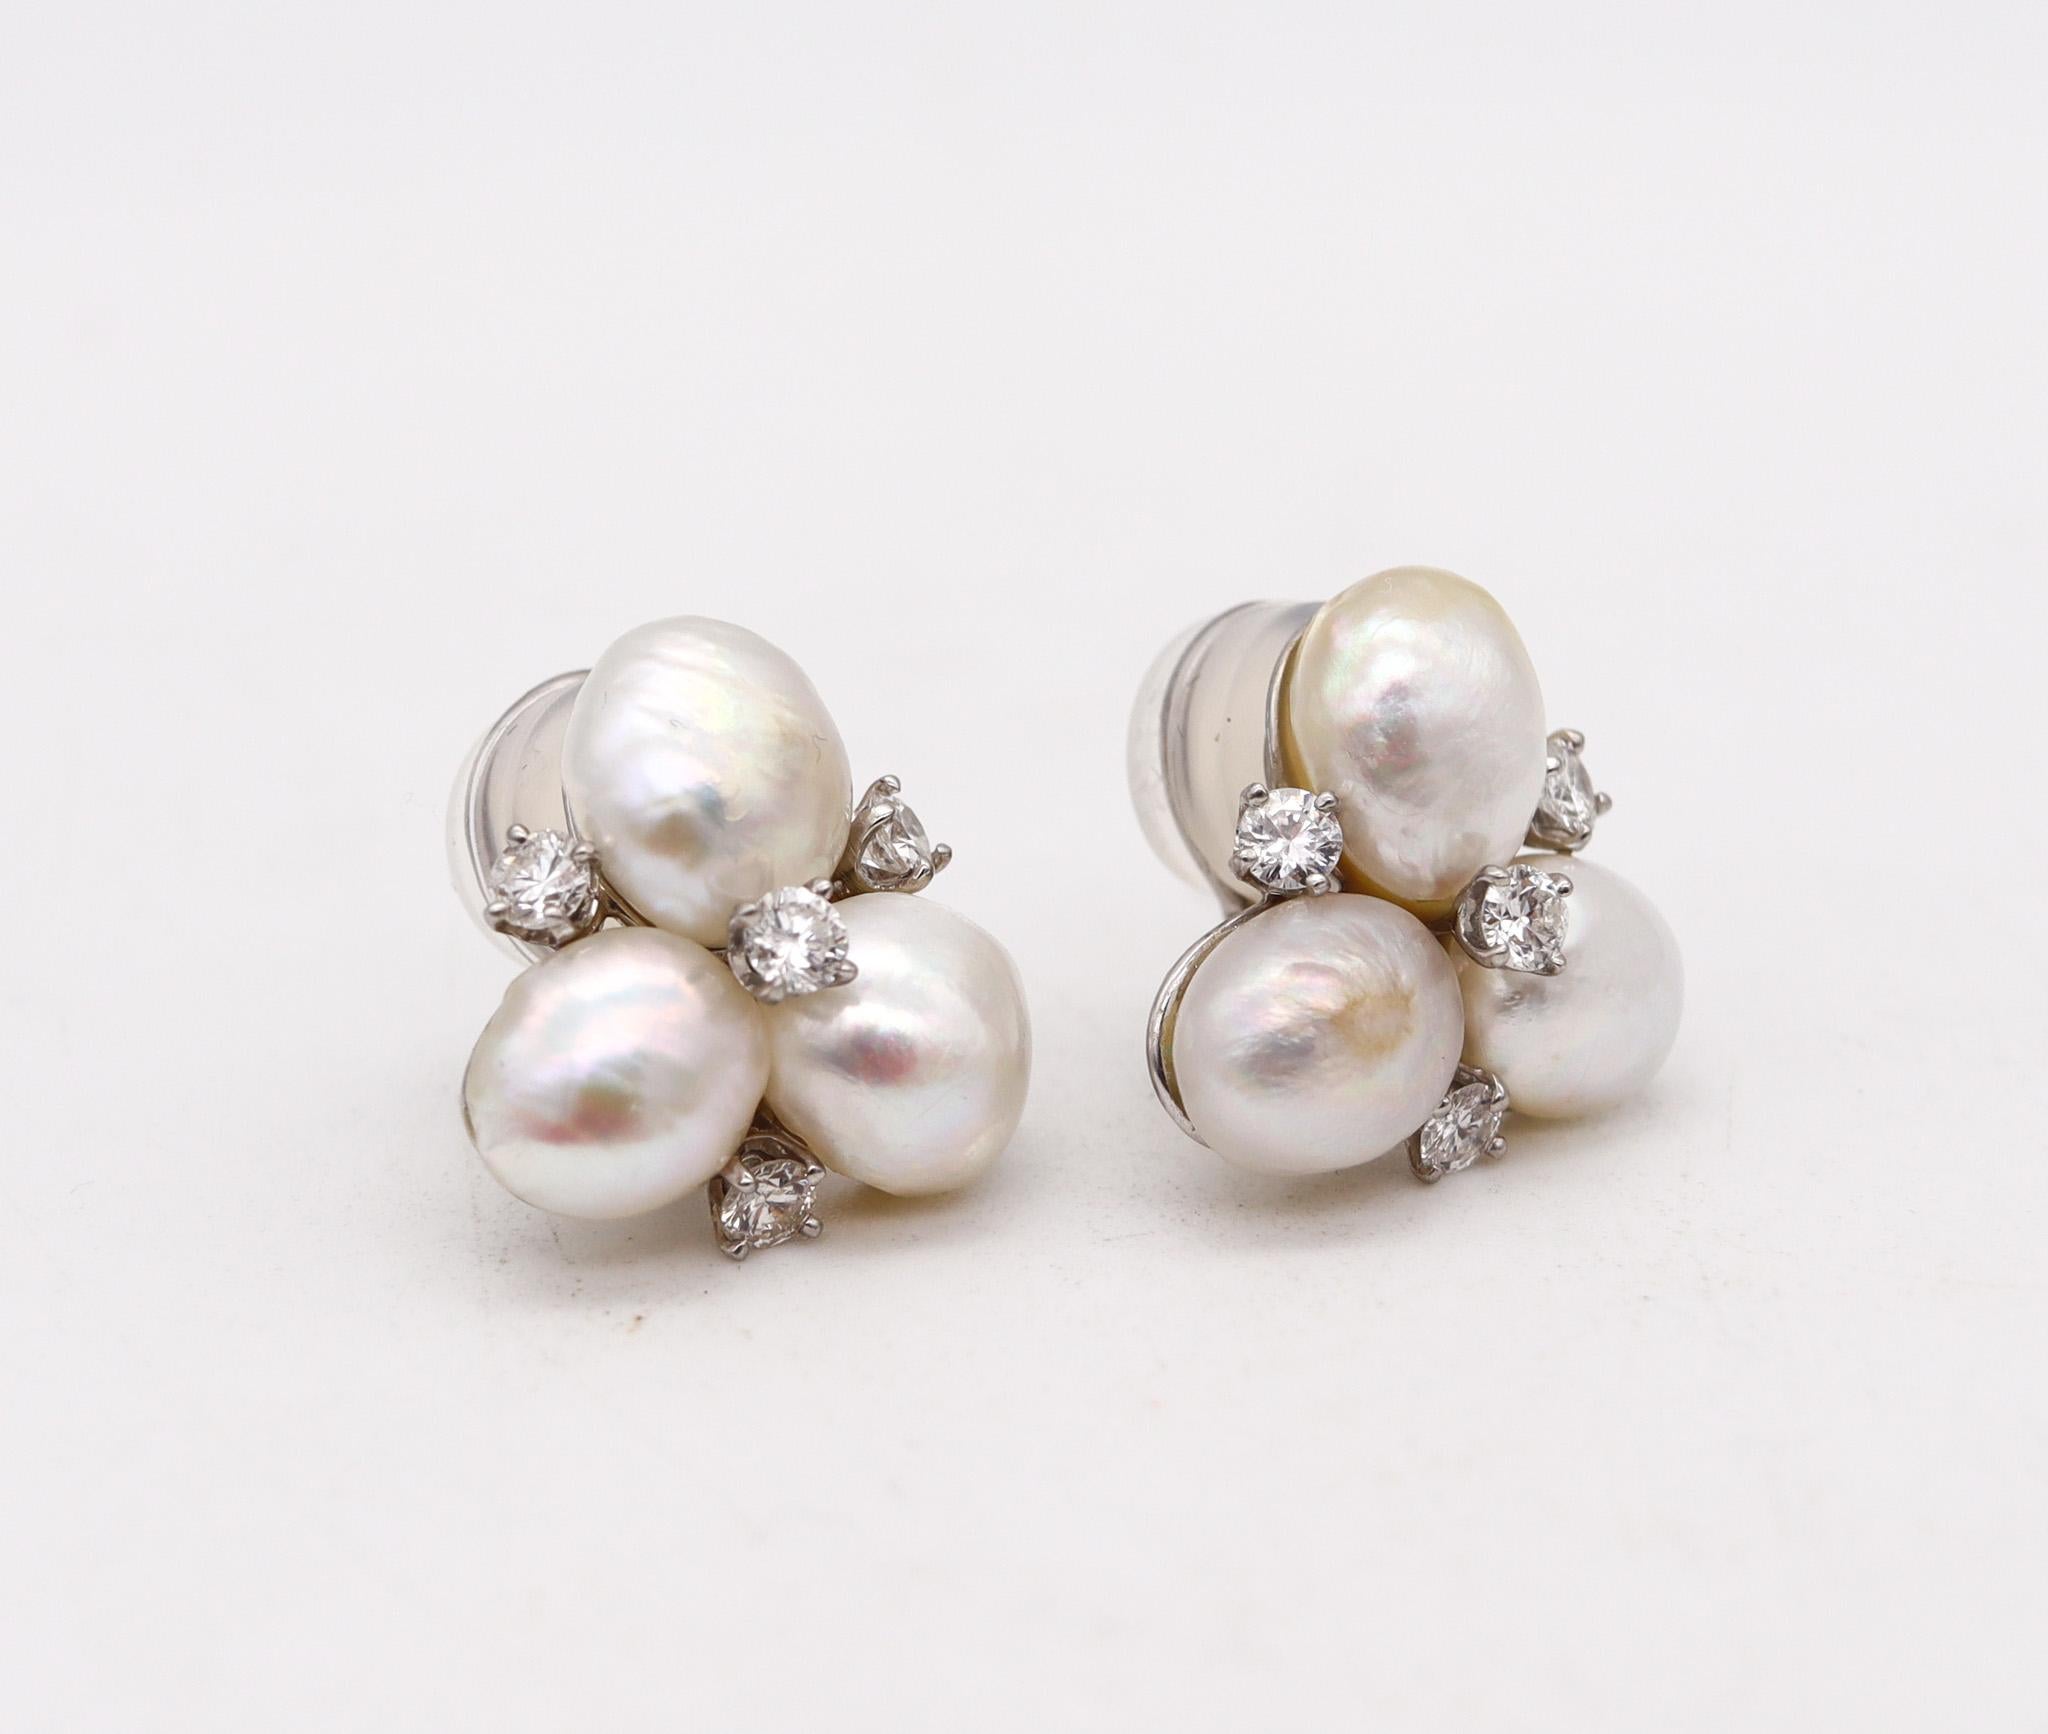 Clip on earrings with natural pearls designed by William Ruser.

Beautiful pair of clips earrings, created in Beverly Hill California back in the 1950 by William Ruser. These pieces has been crafted with classic design in solid .900/.999 platinum